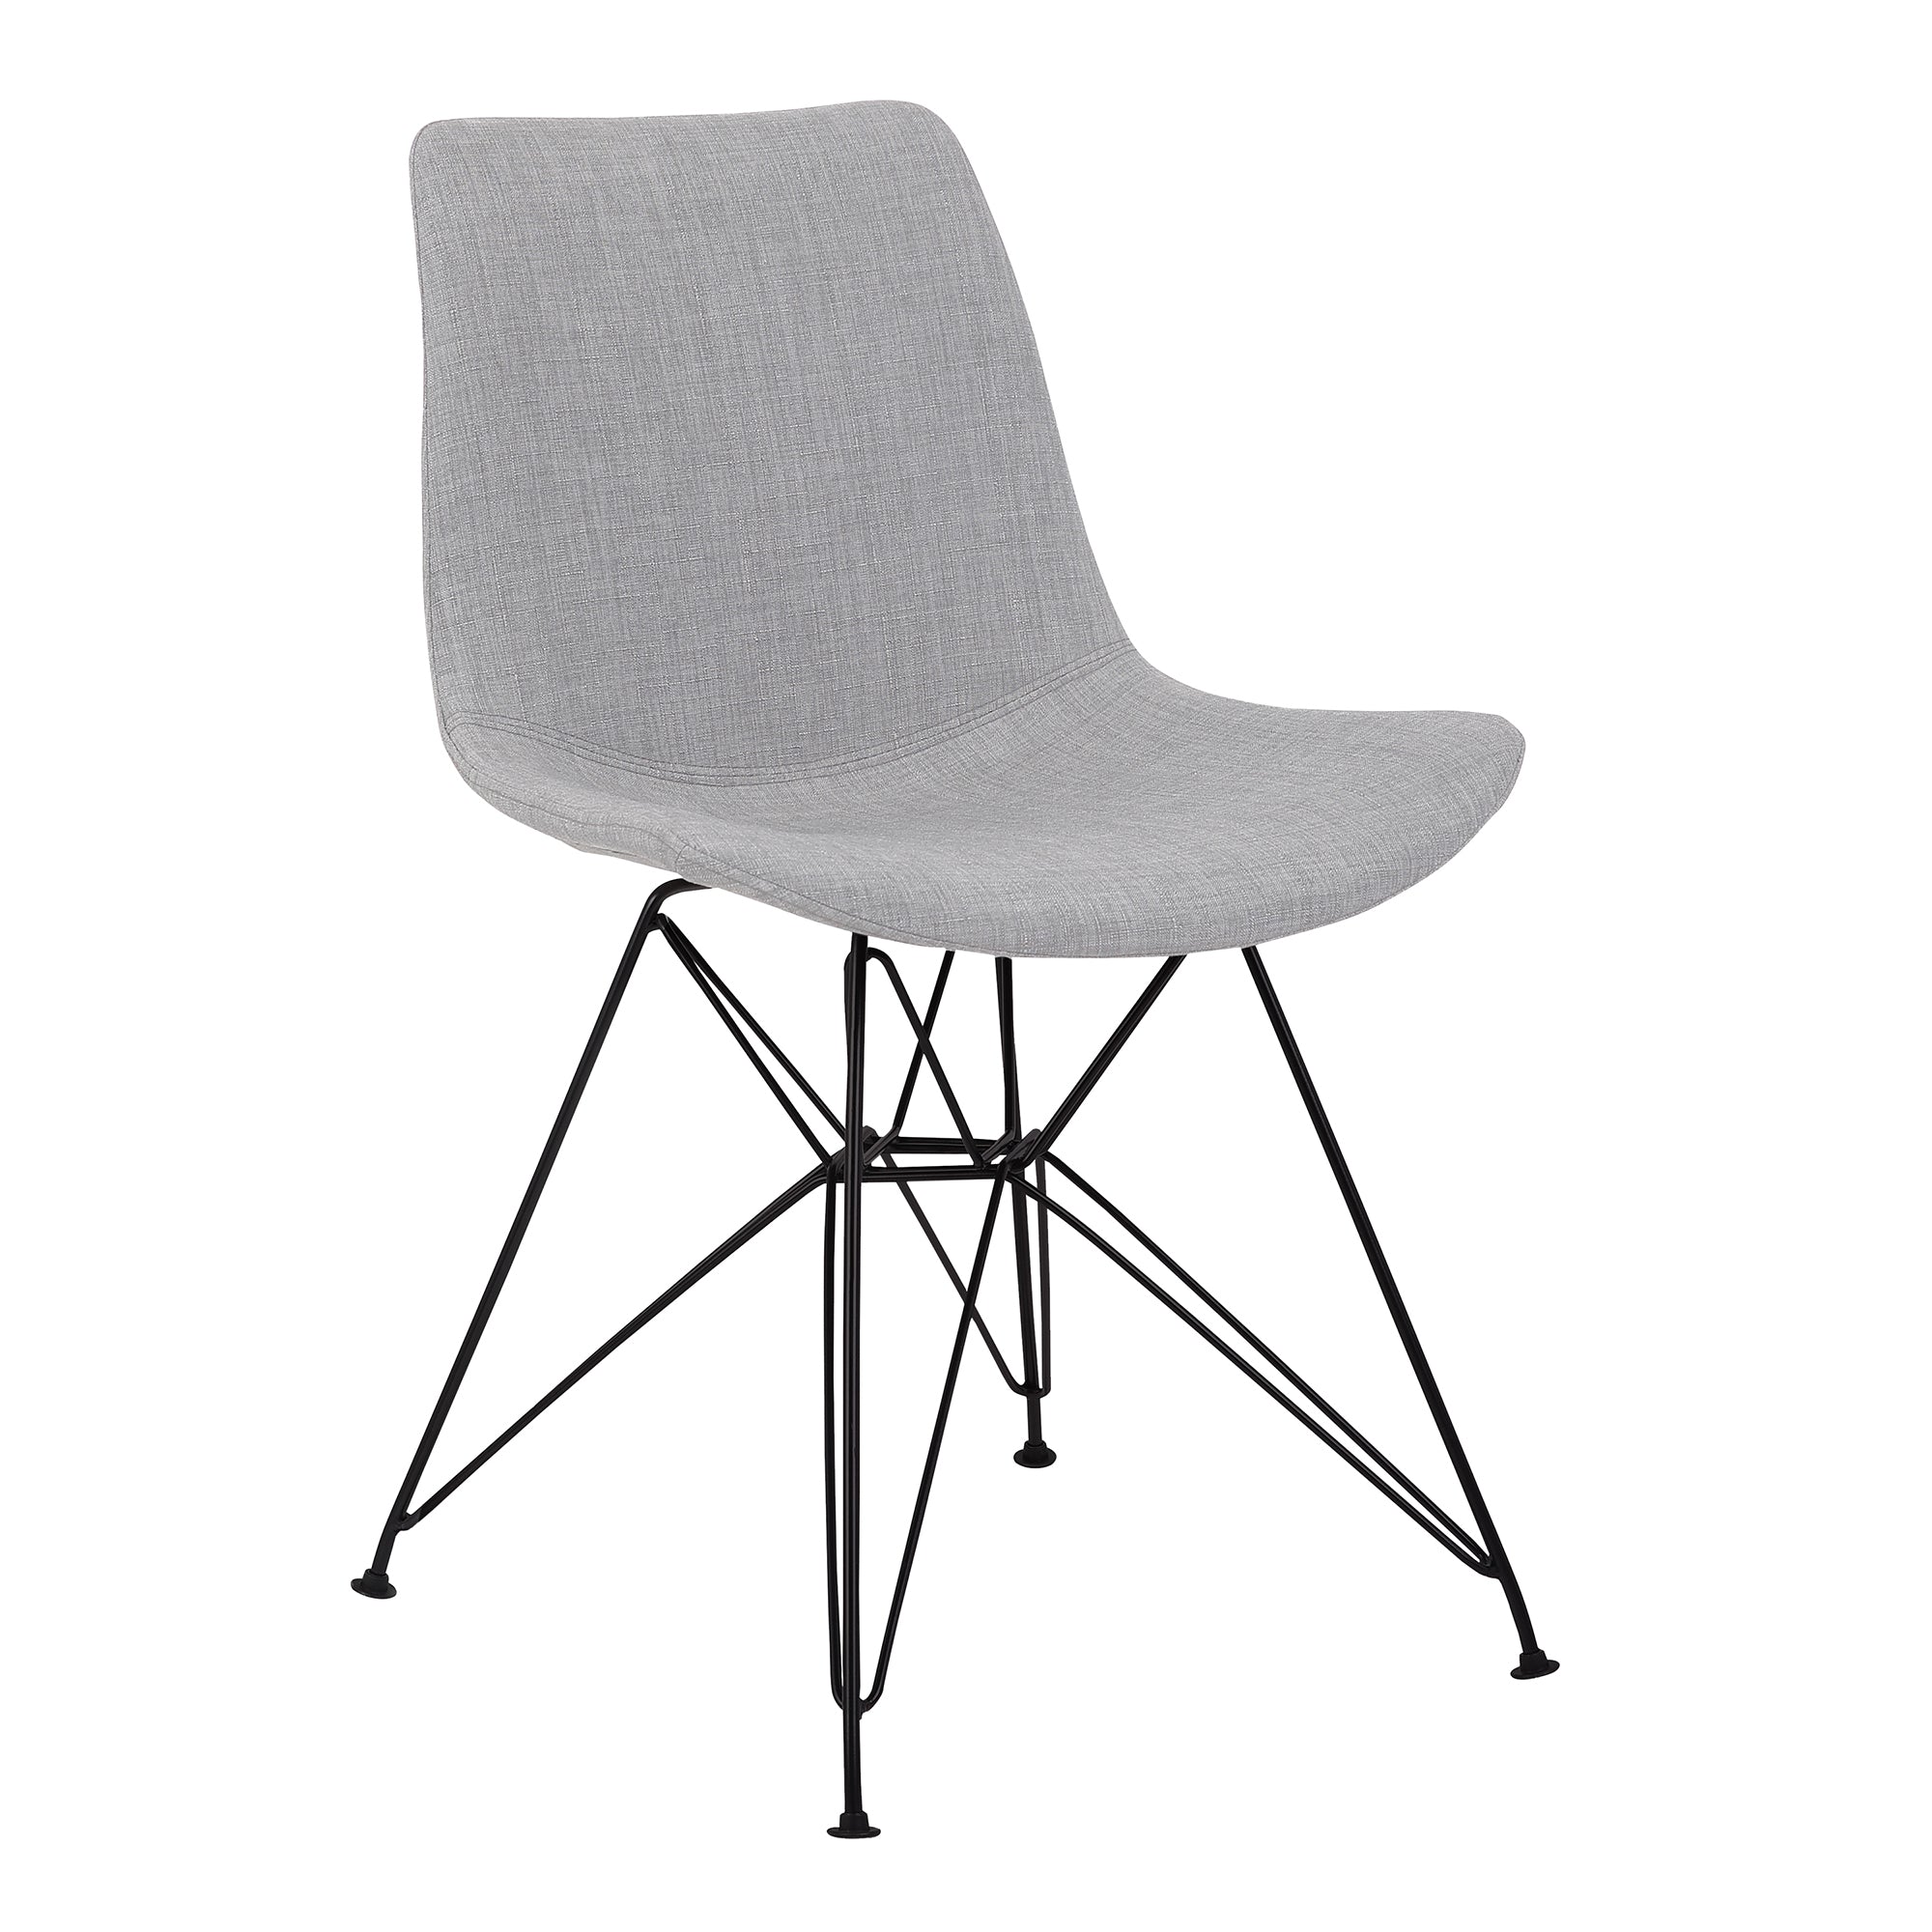 Armen Living Lcplchblgr Palmetto Contemporary Dining Chair In Grey Fabric With Black Metal Legs